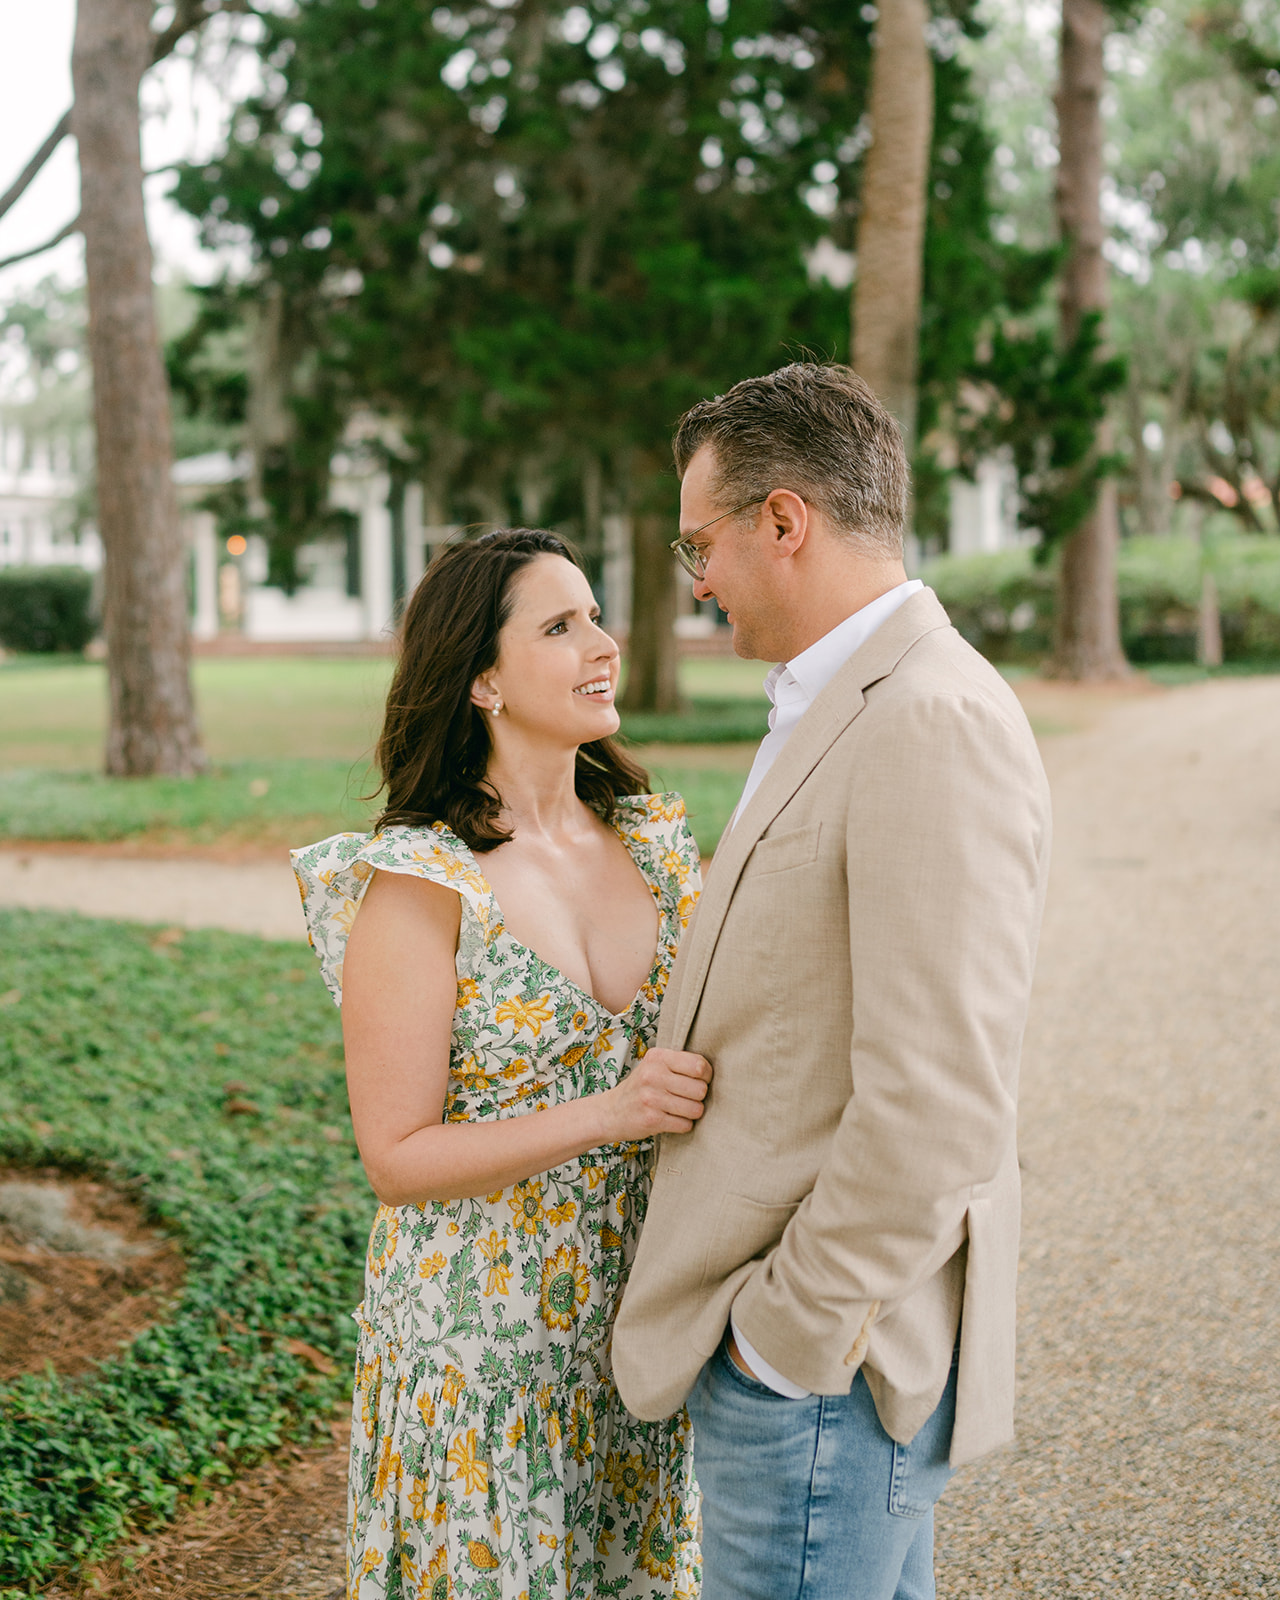 Wife and husband embrace and look towards each other during their Palmetto Bluff photoshoot.